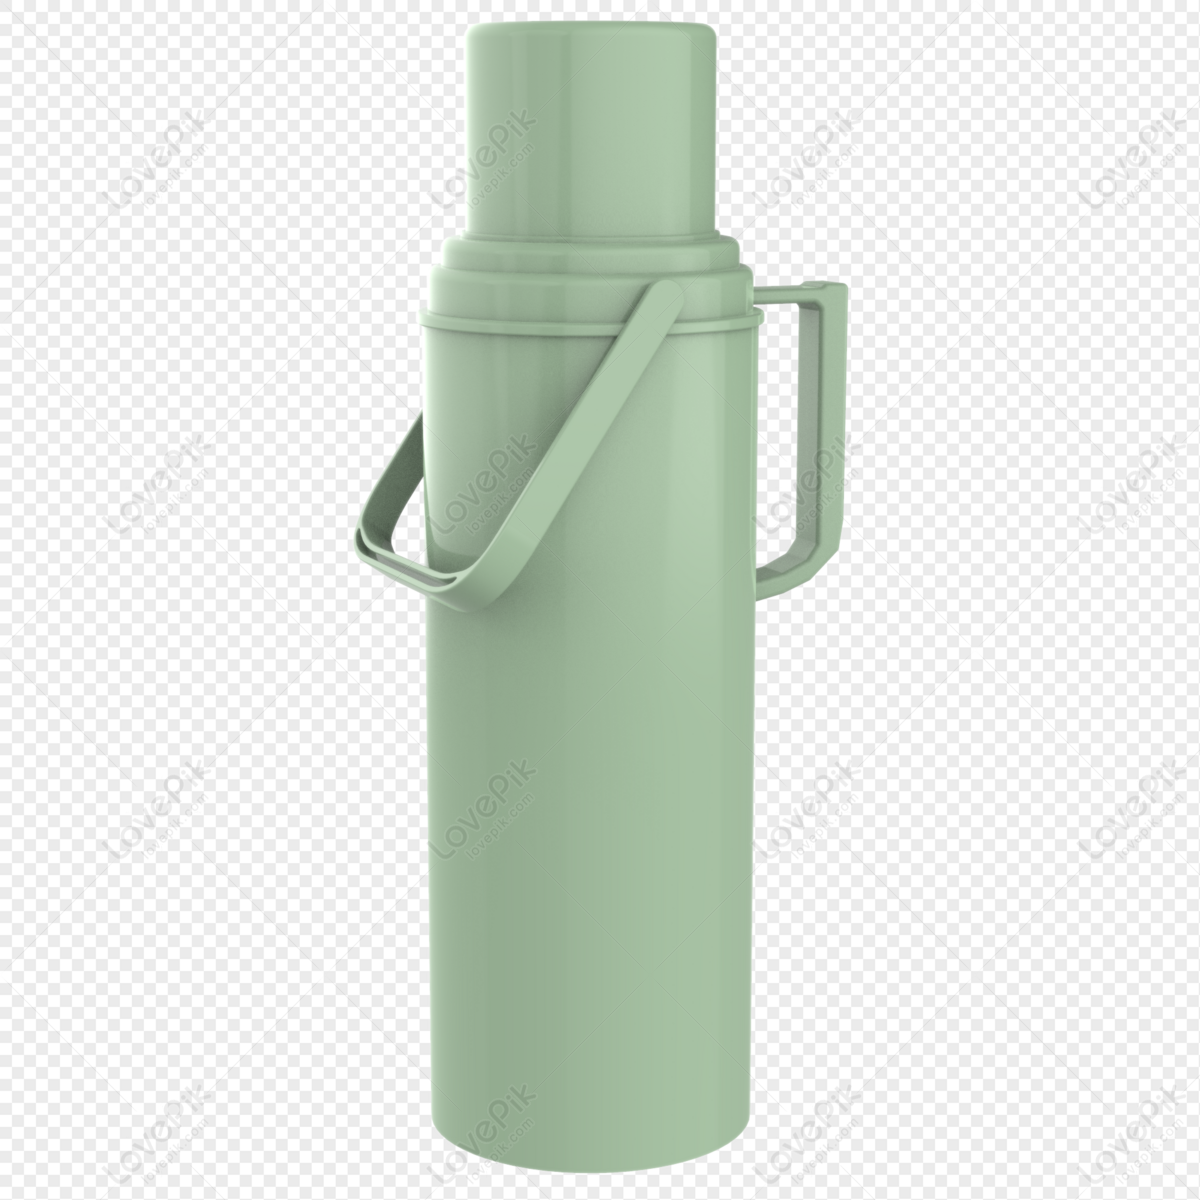 Free Thermos Icon - Download in Flat Style